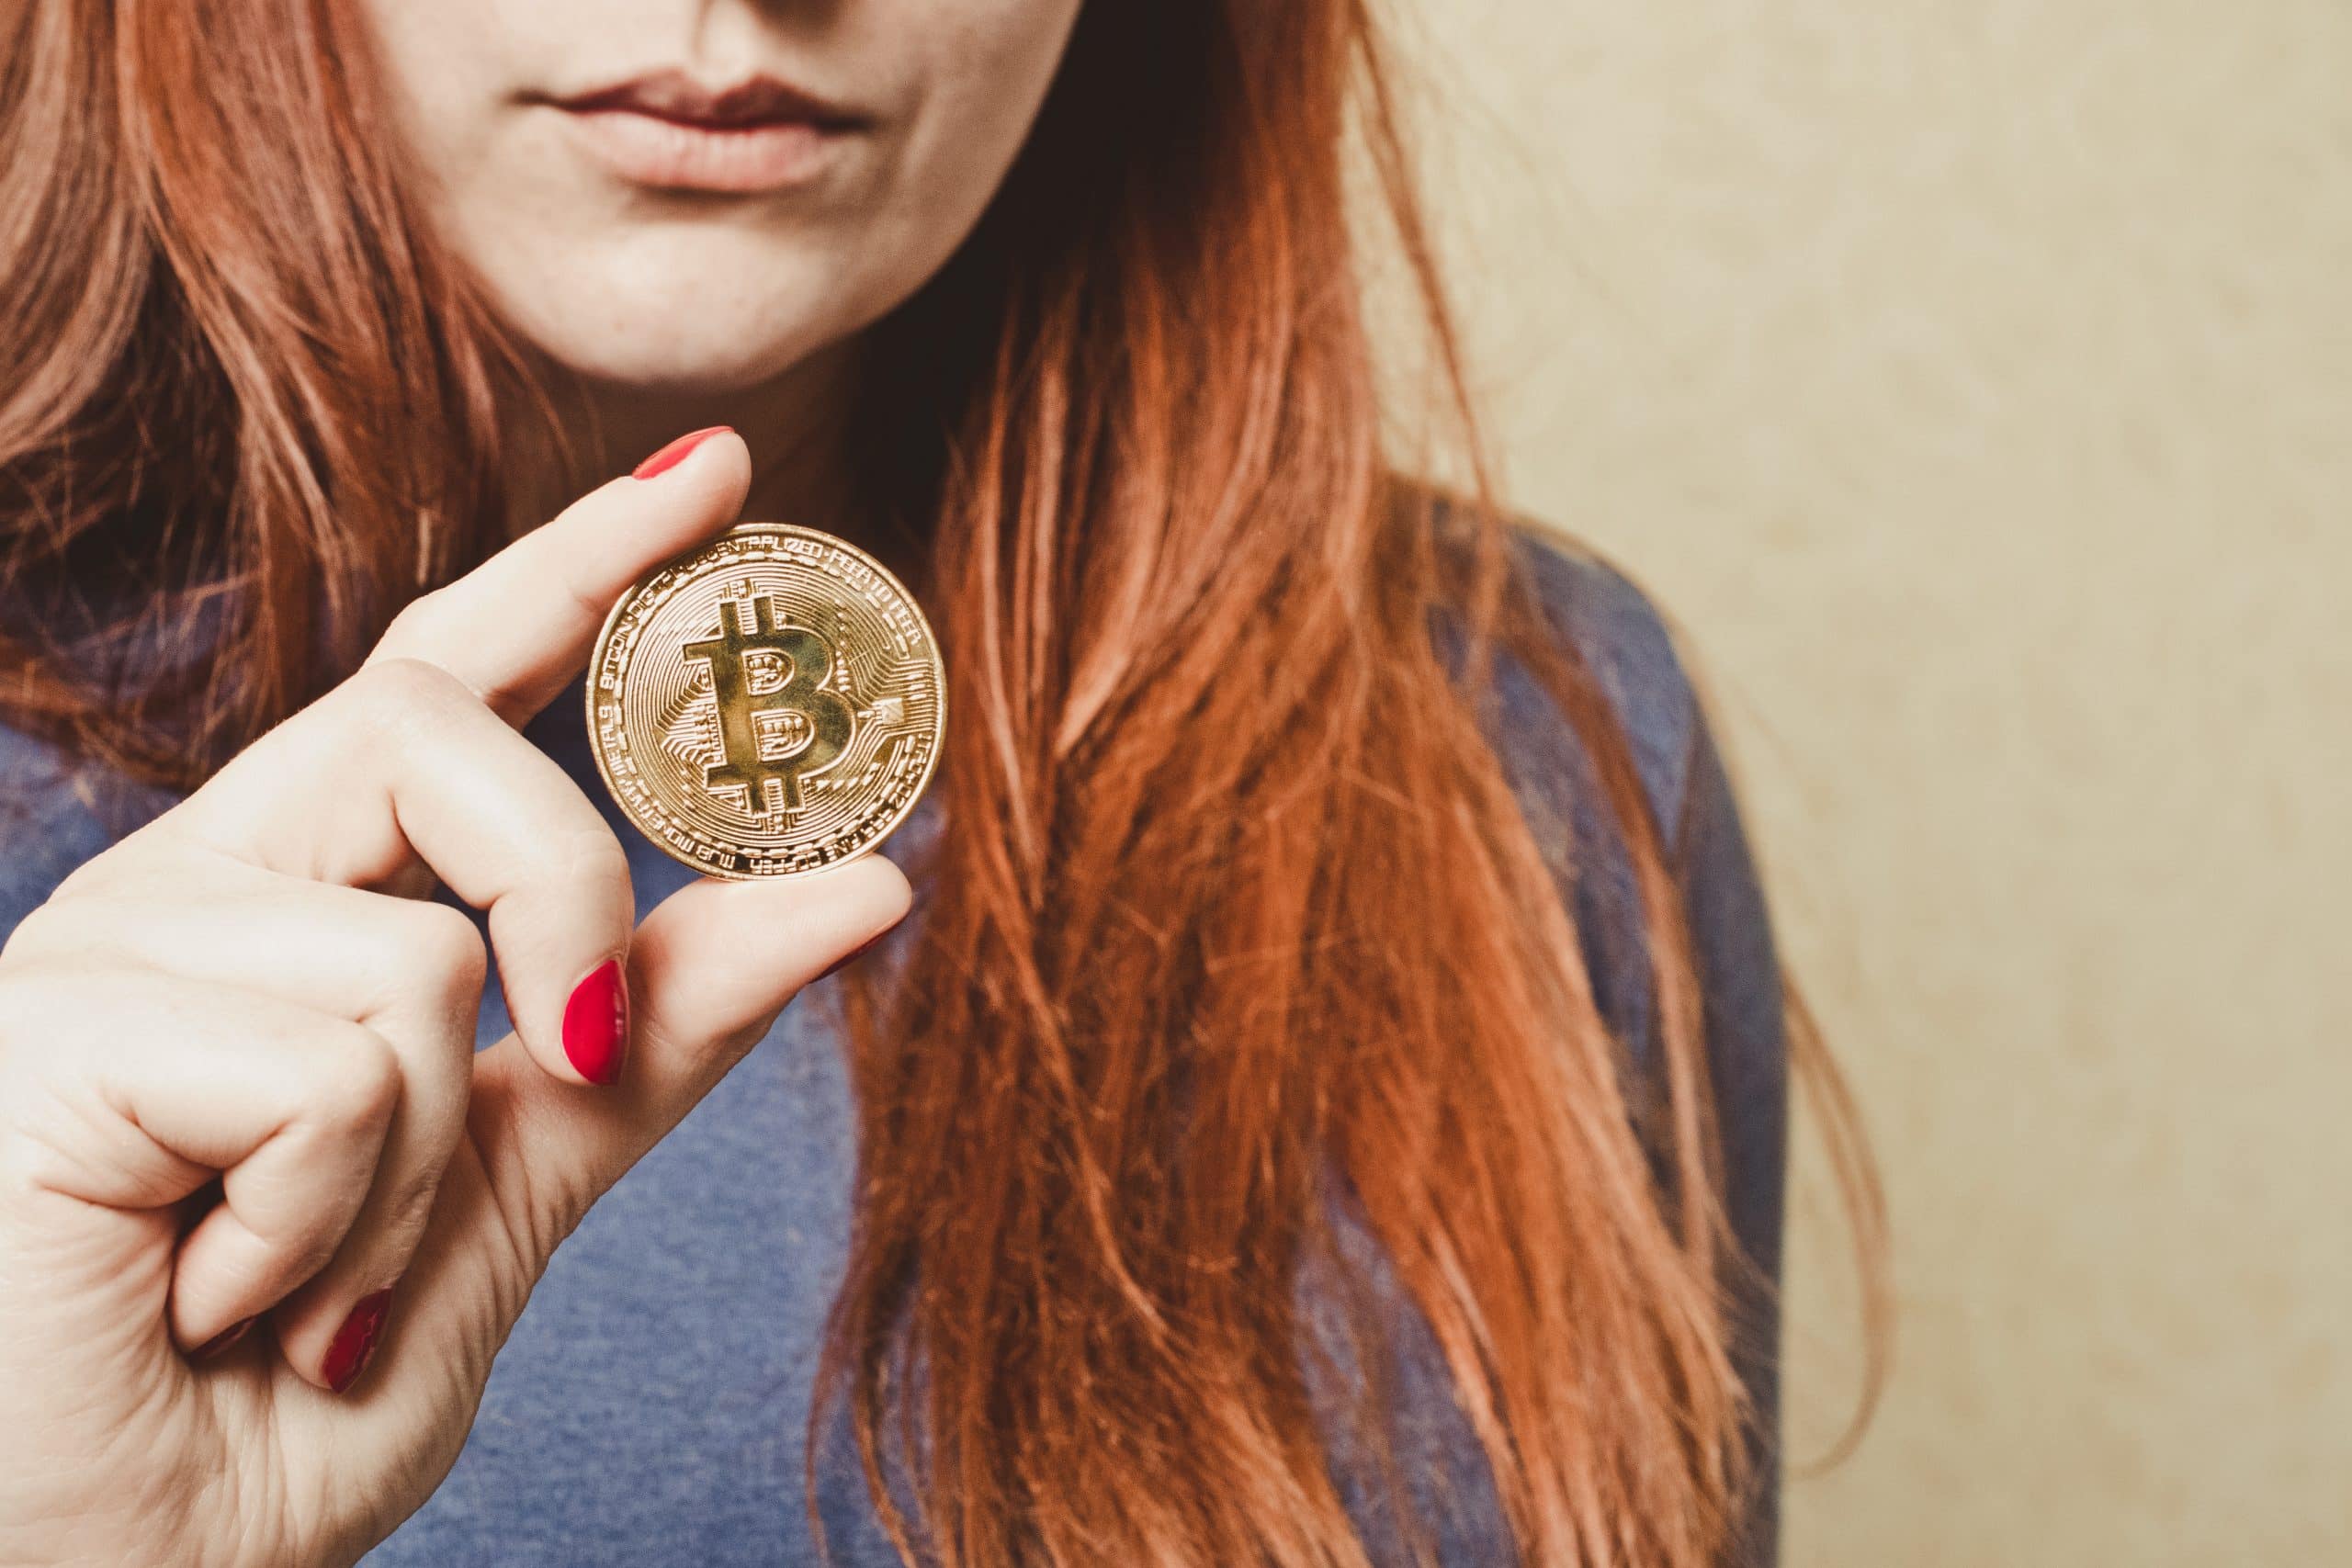 Red-haired girl holds bitcoin gold coin in her hand